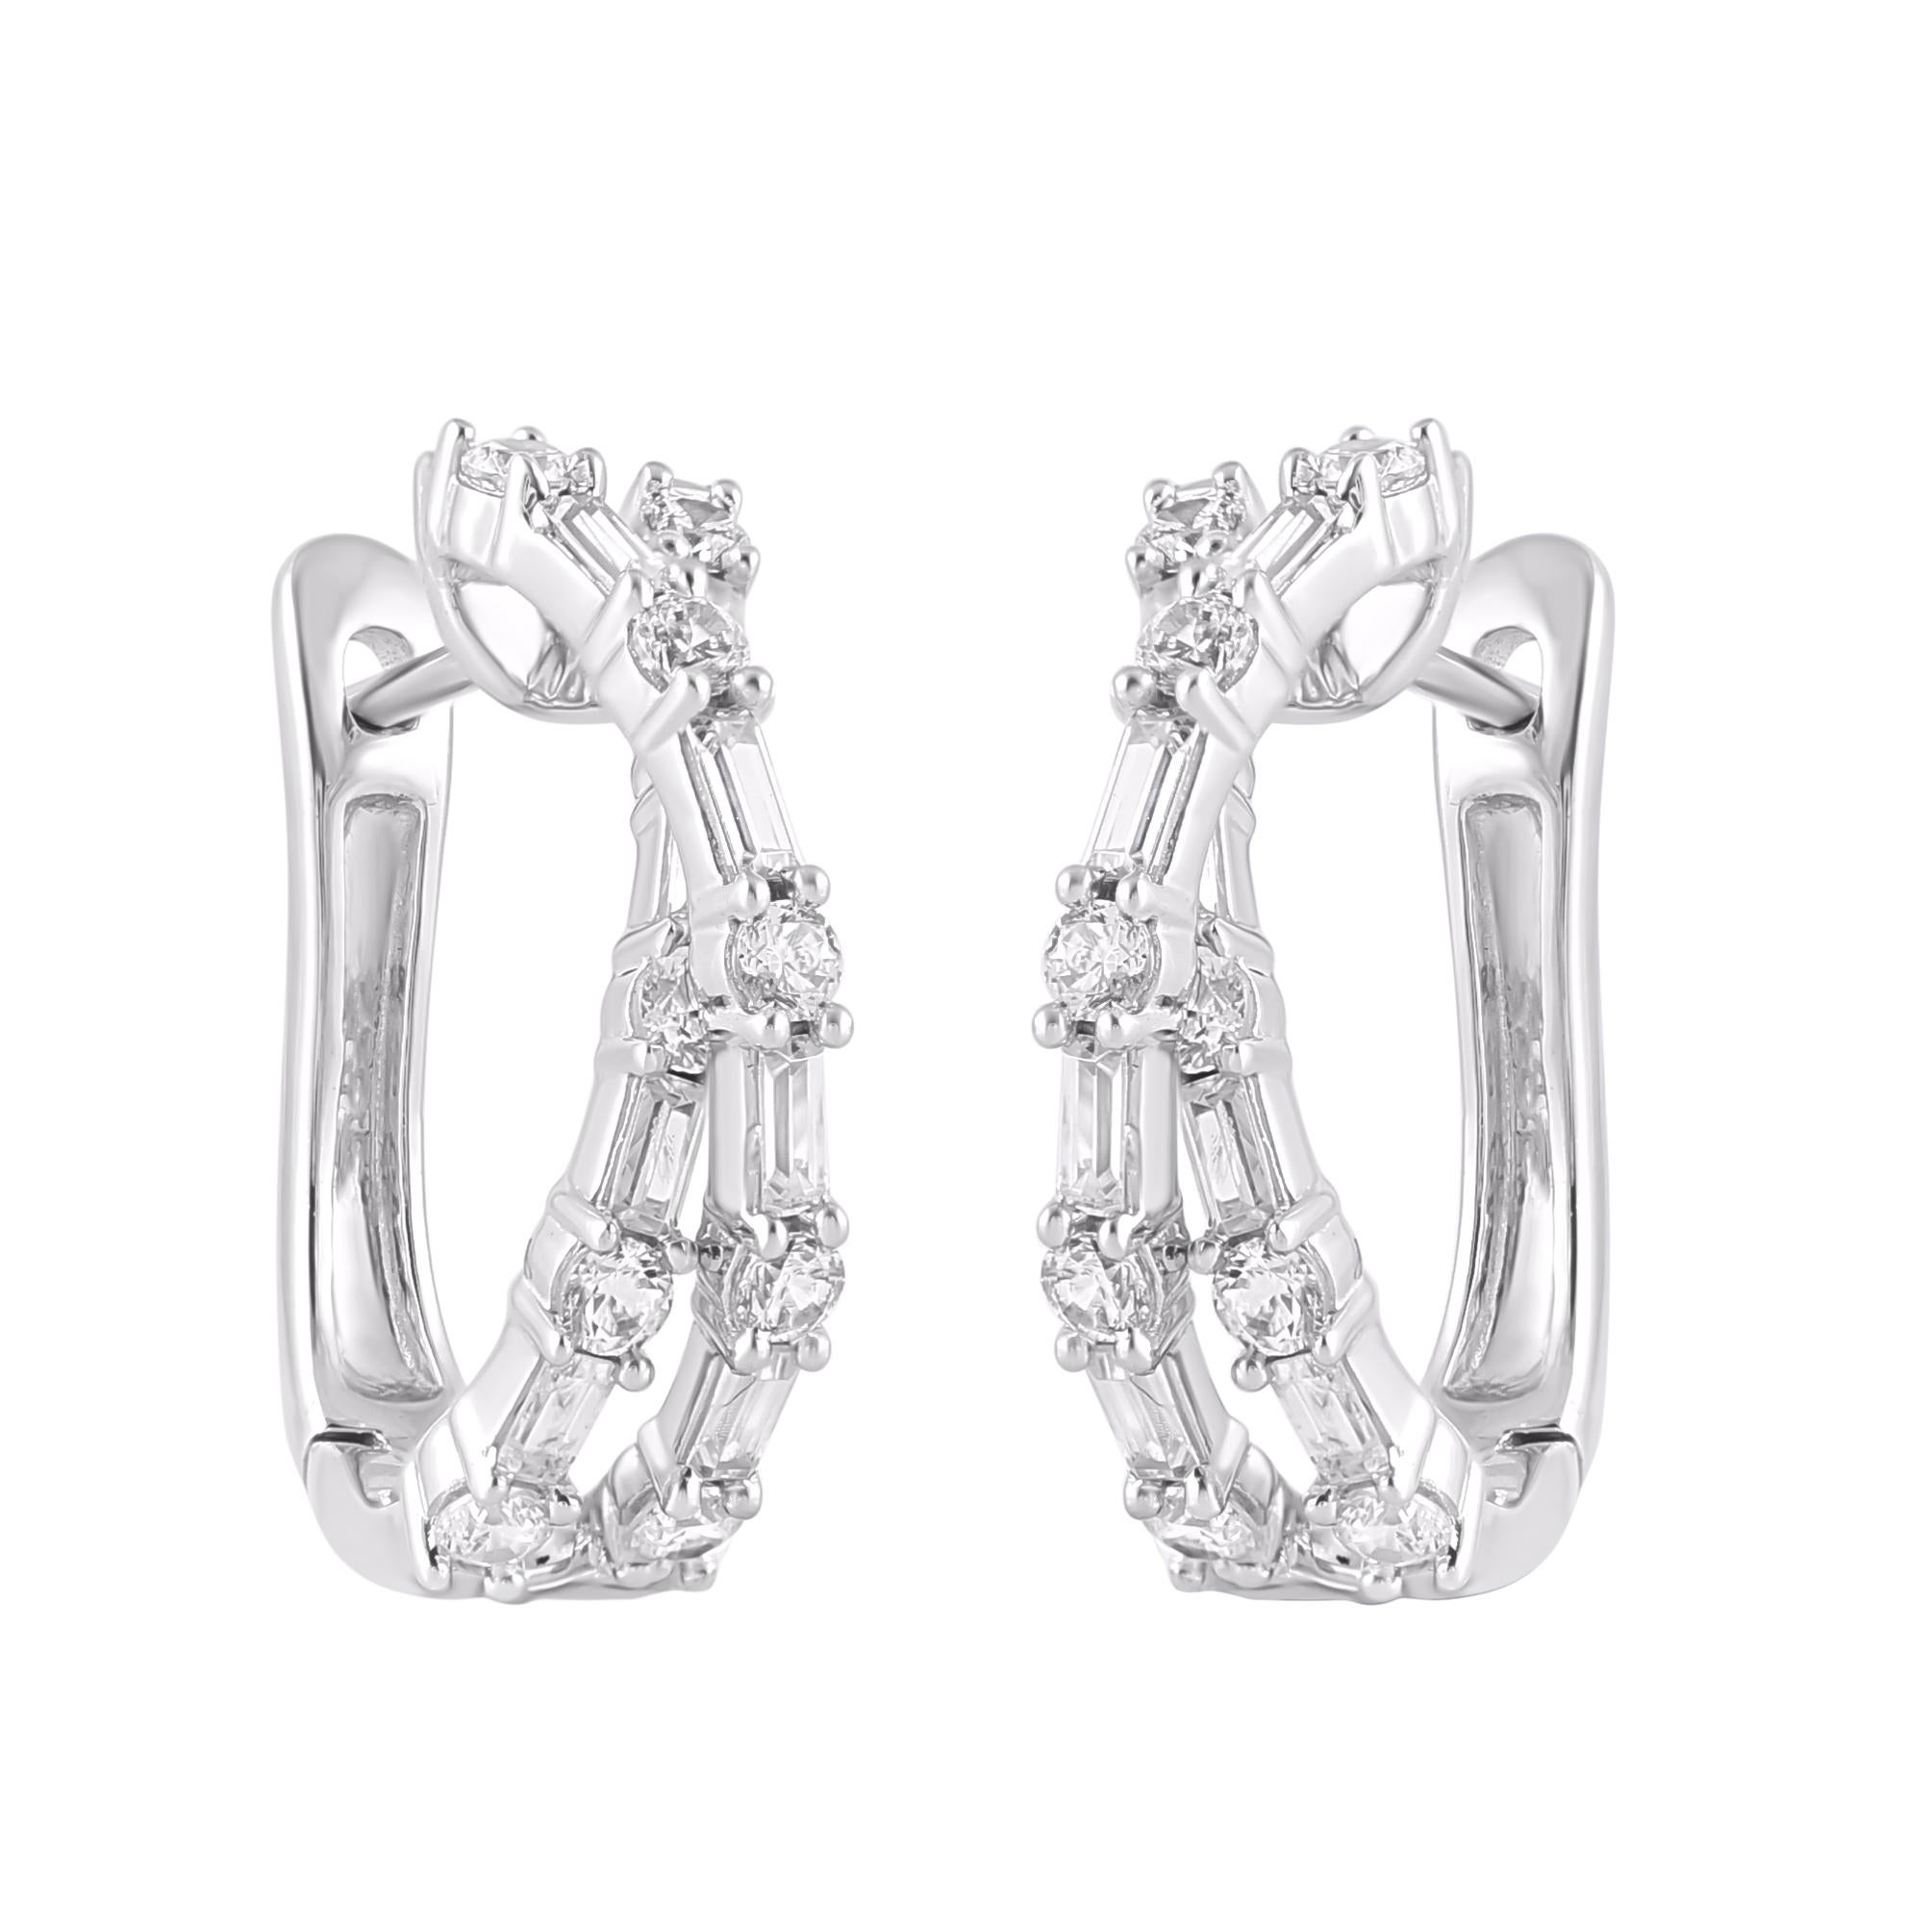 Bring charm to your look with this diamond hoop earrings. This earring is beautifully designed and studded with 36 brilliant cut round diamond and baguette diamonds set in prong setting. We only use natural, 100% conflict free diamonds which shines